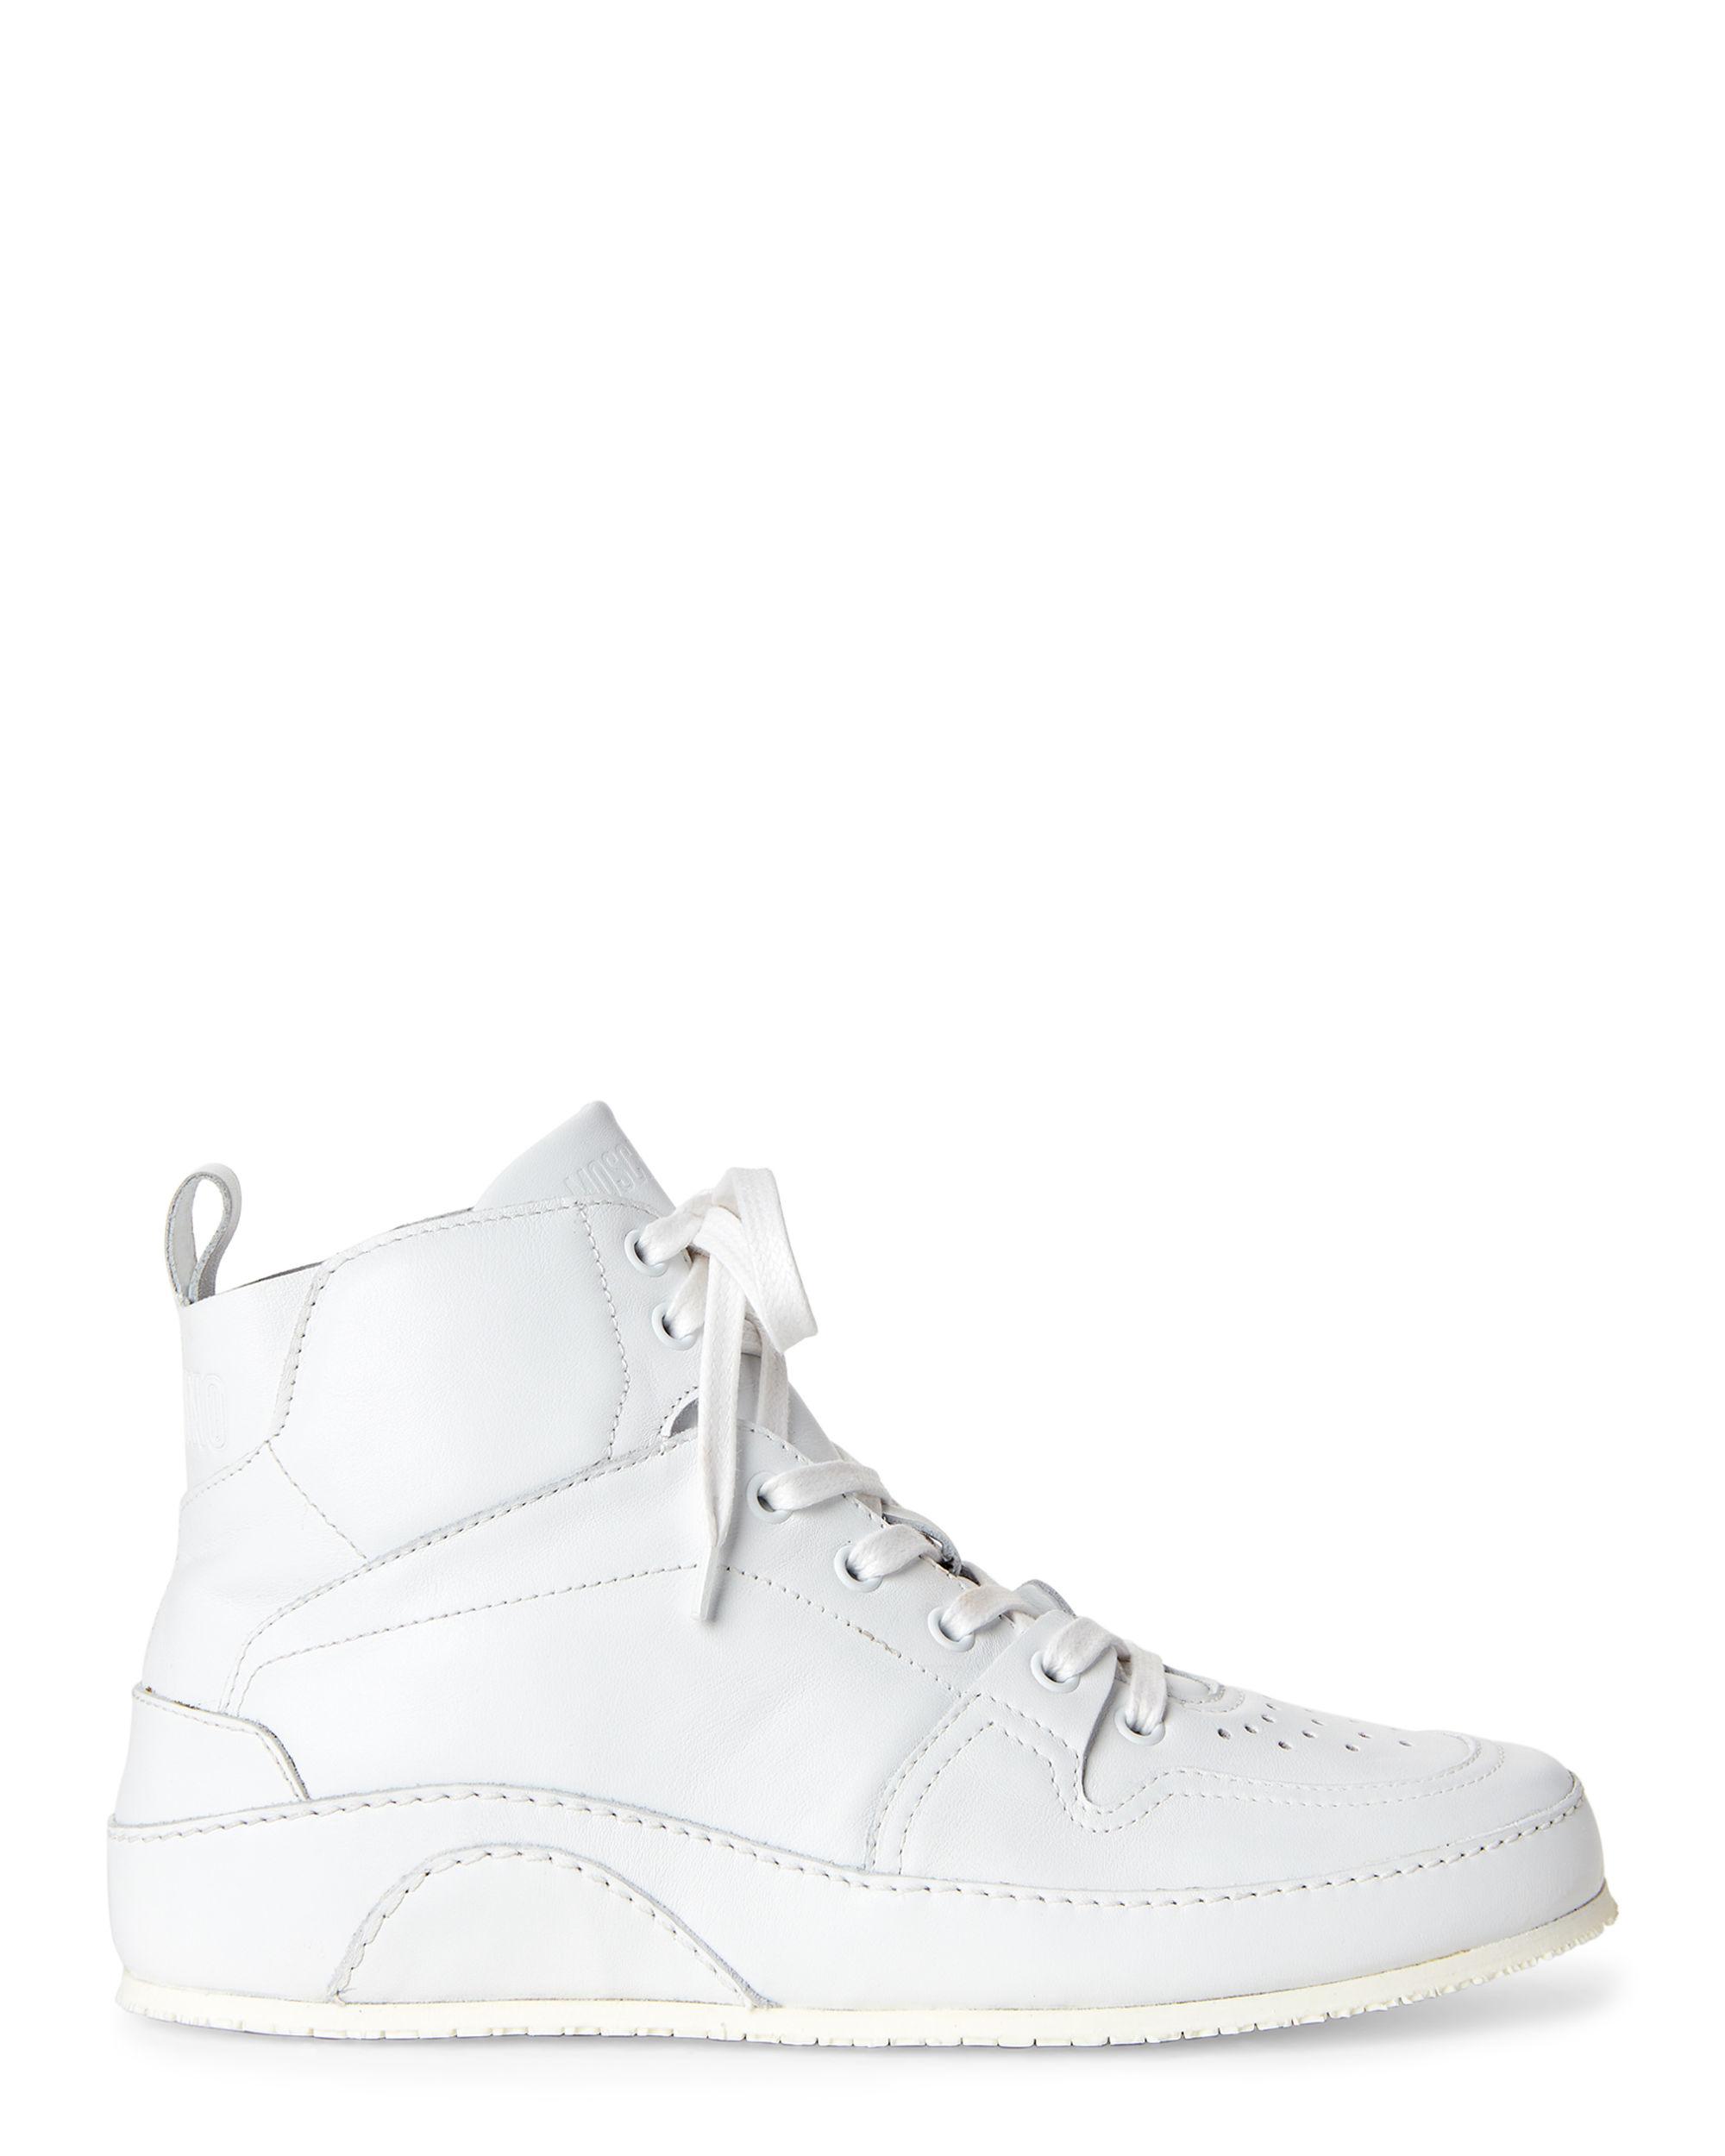 Moschino White Leather High-top Sneakers in White for Men - Lyst